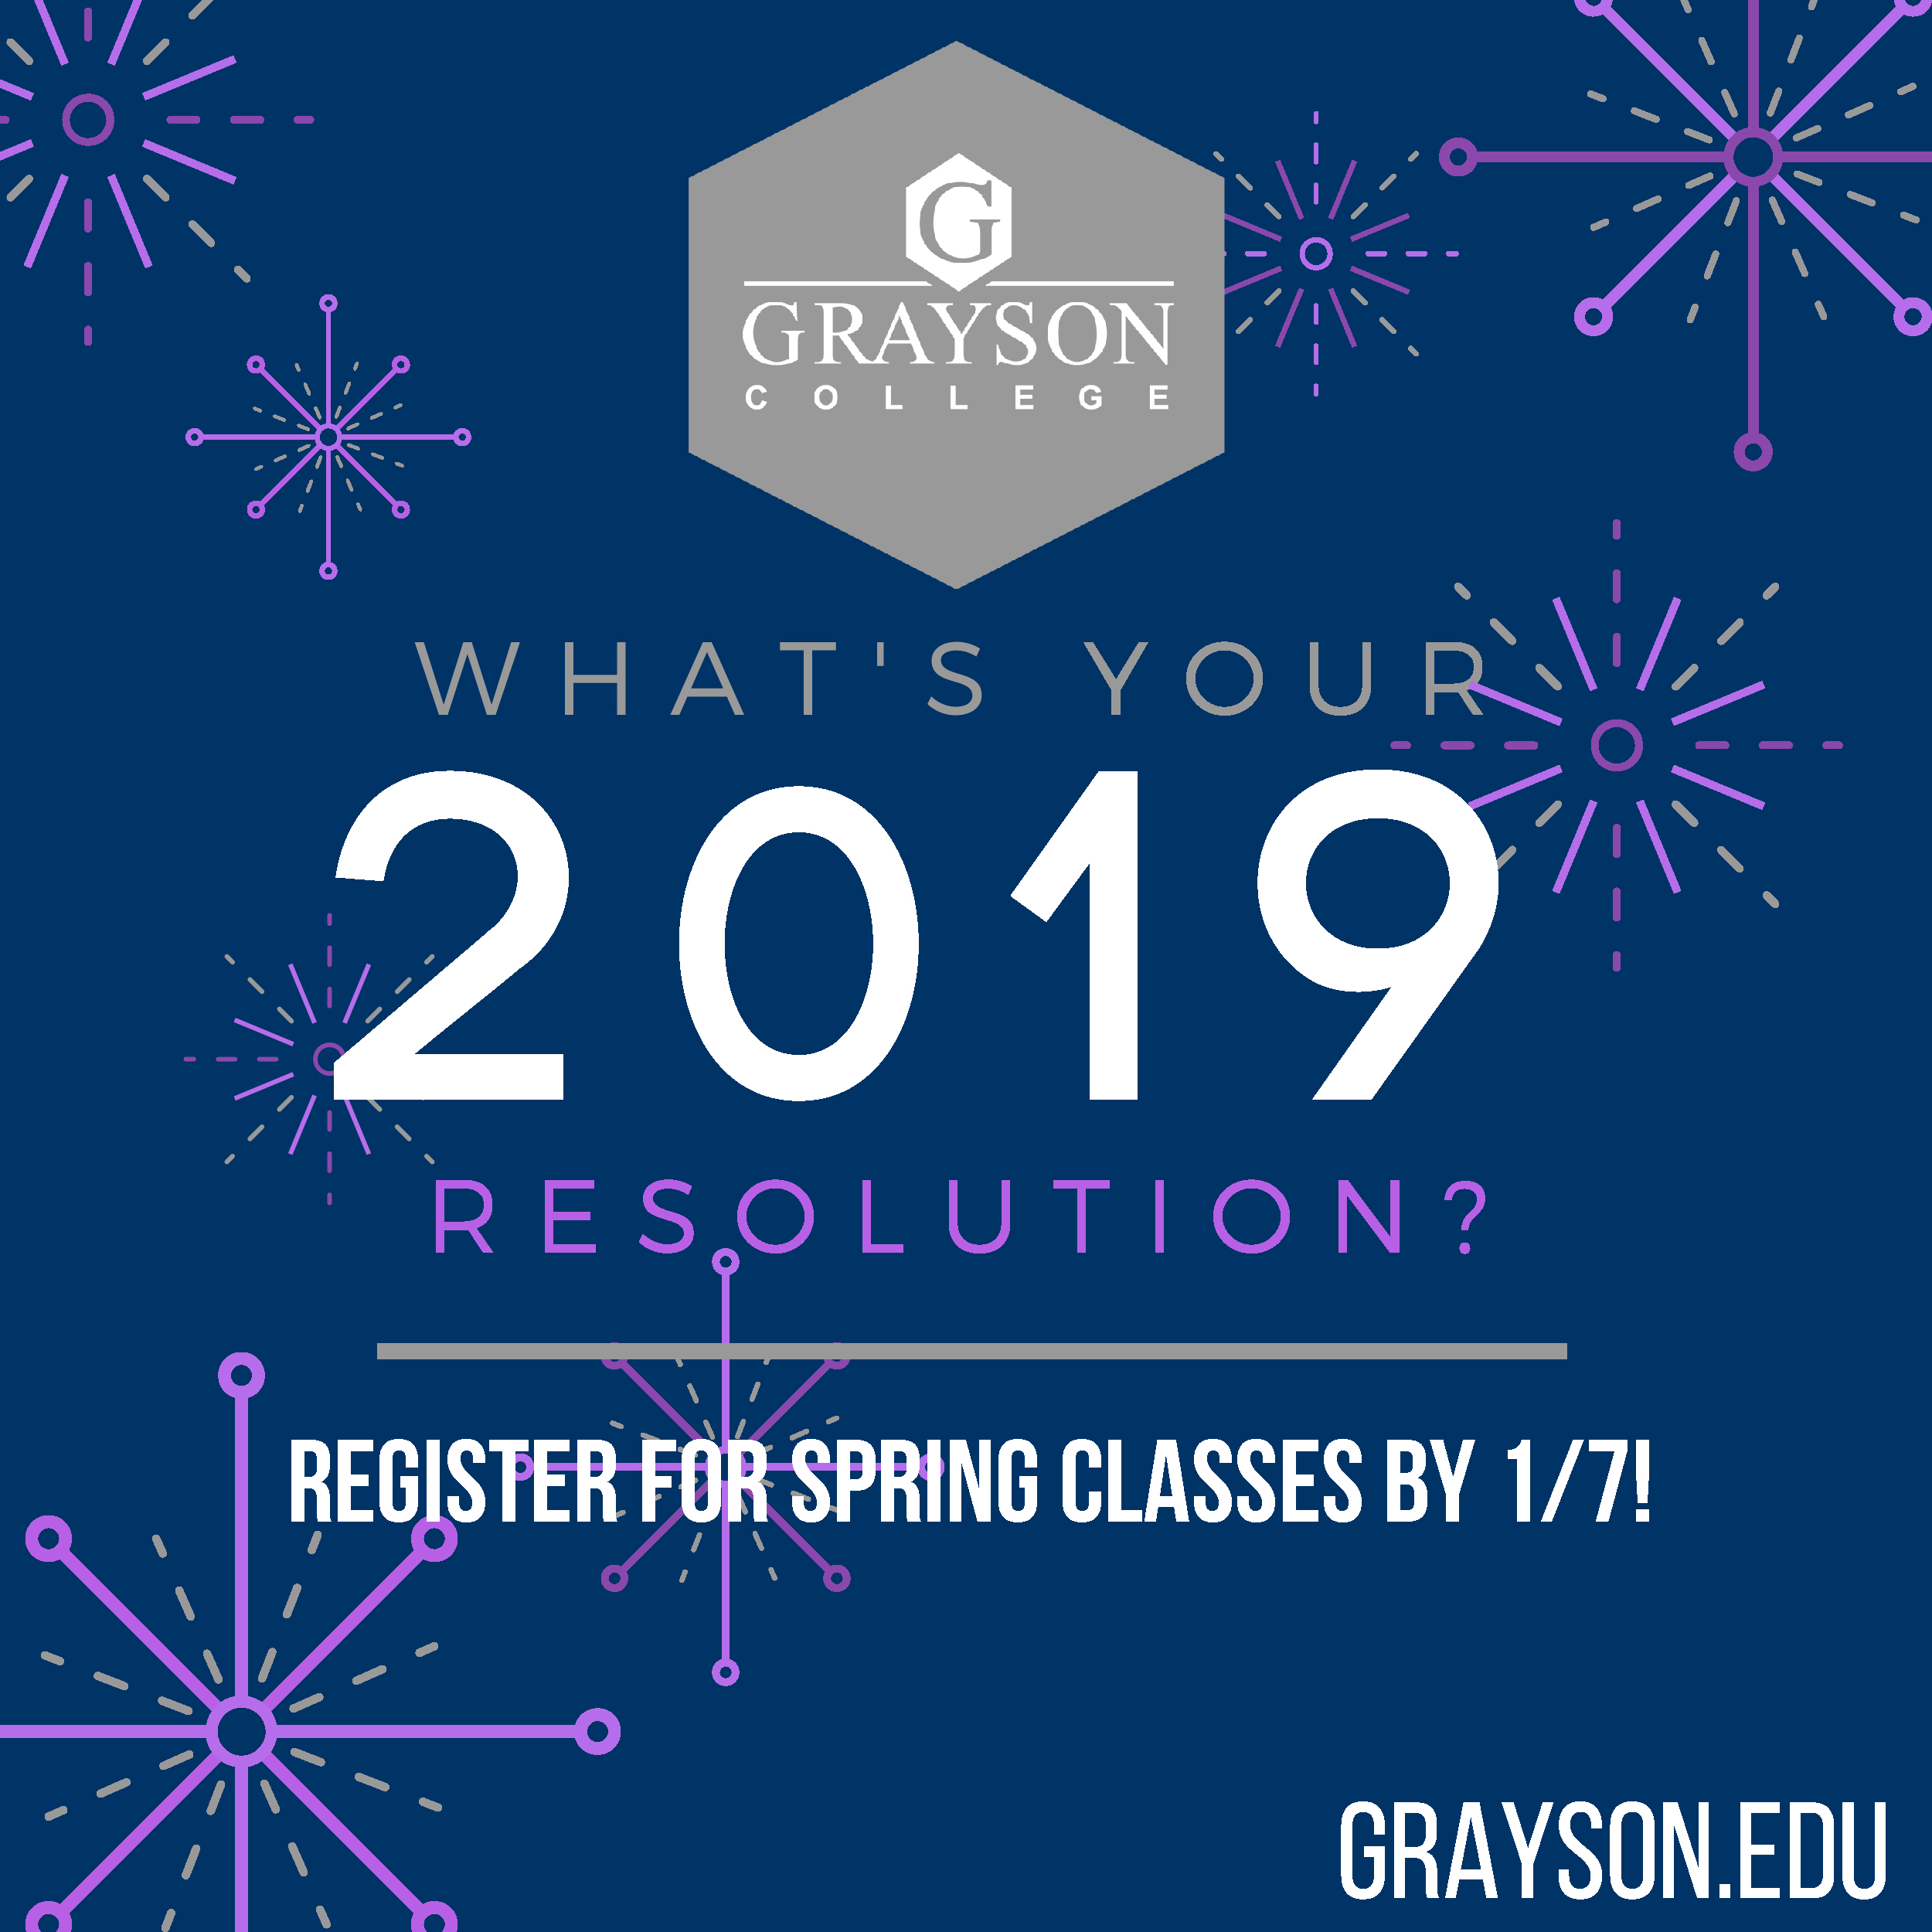 What's your 201 resolution? Register for spring classes by 1/7